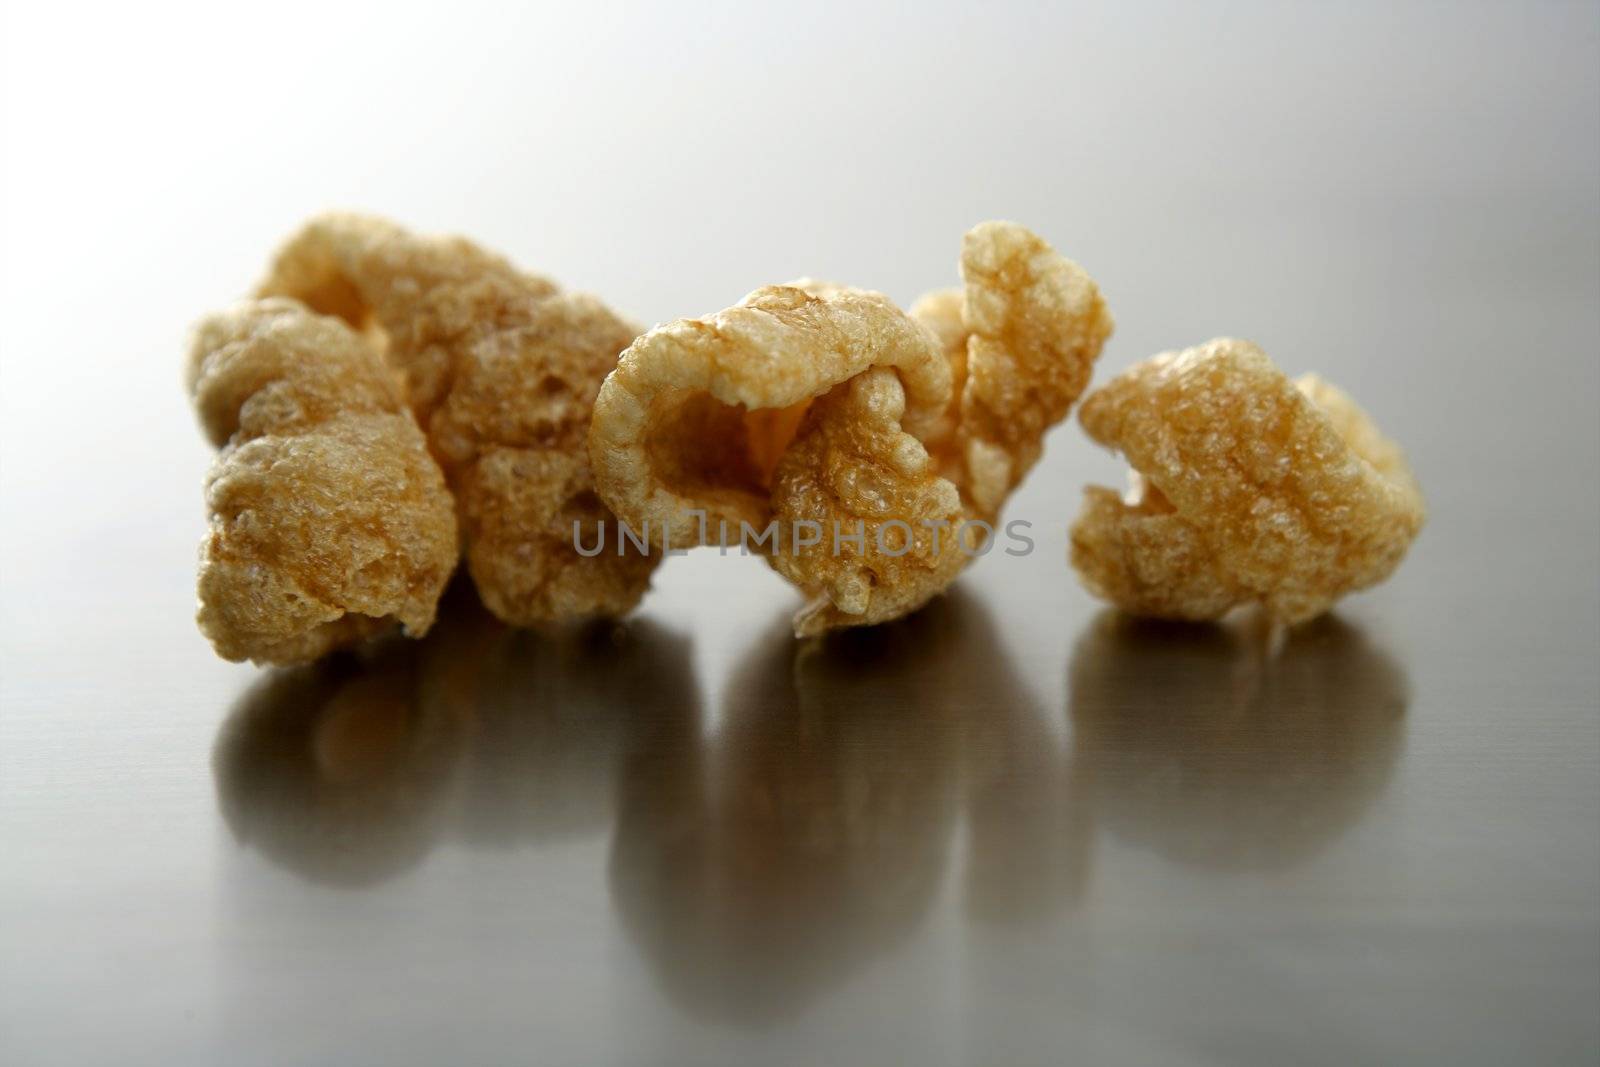 Pork rusted rinds, fat unhealthy snack apetizer